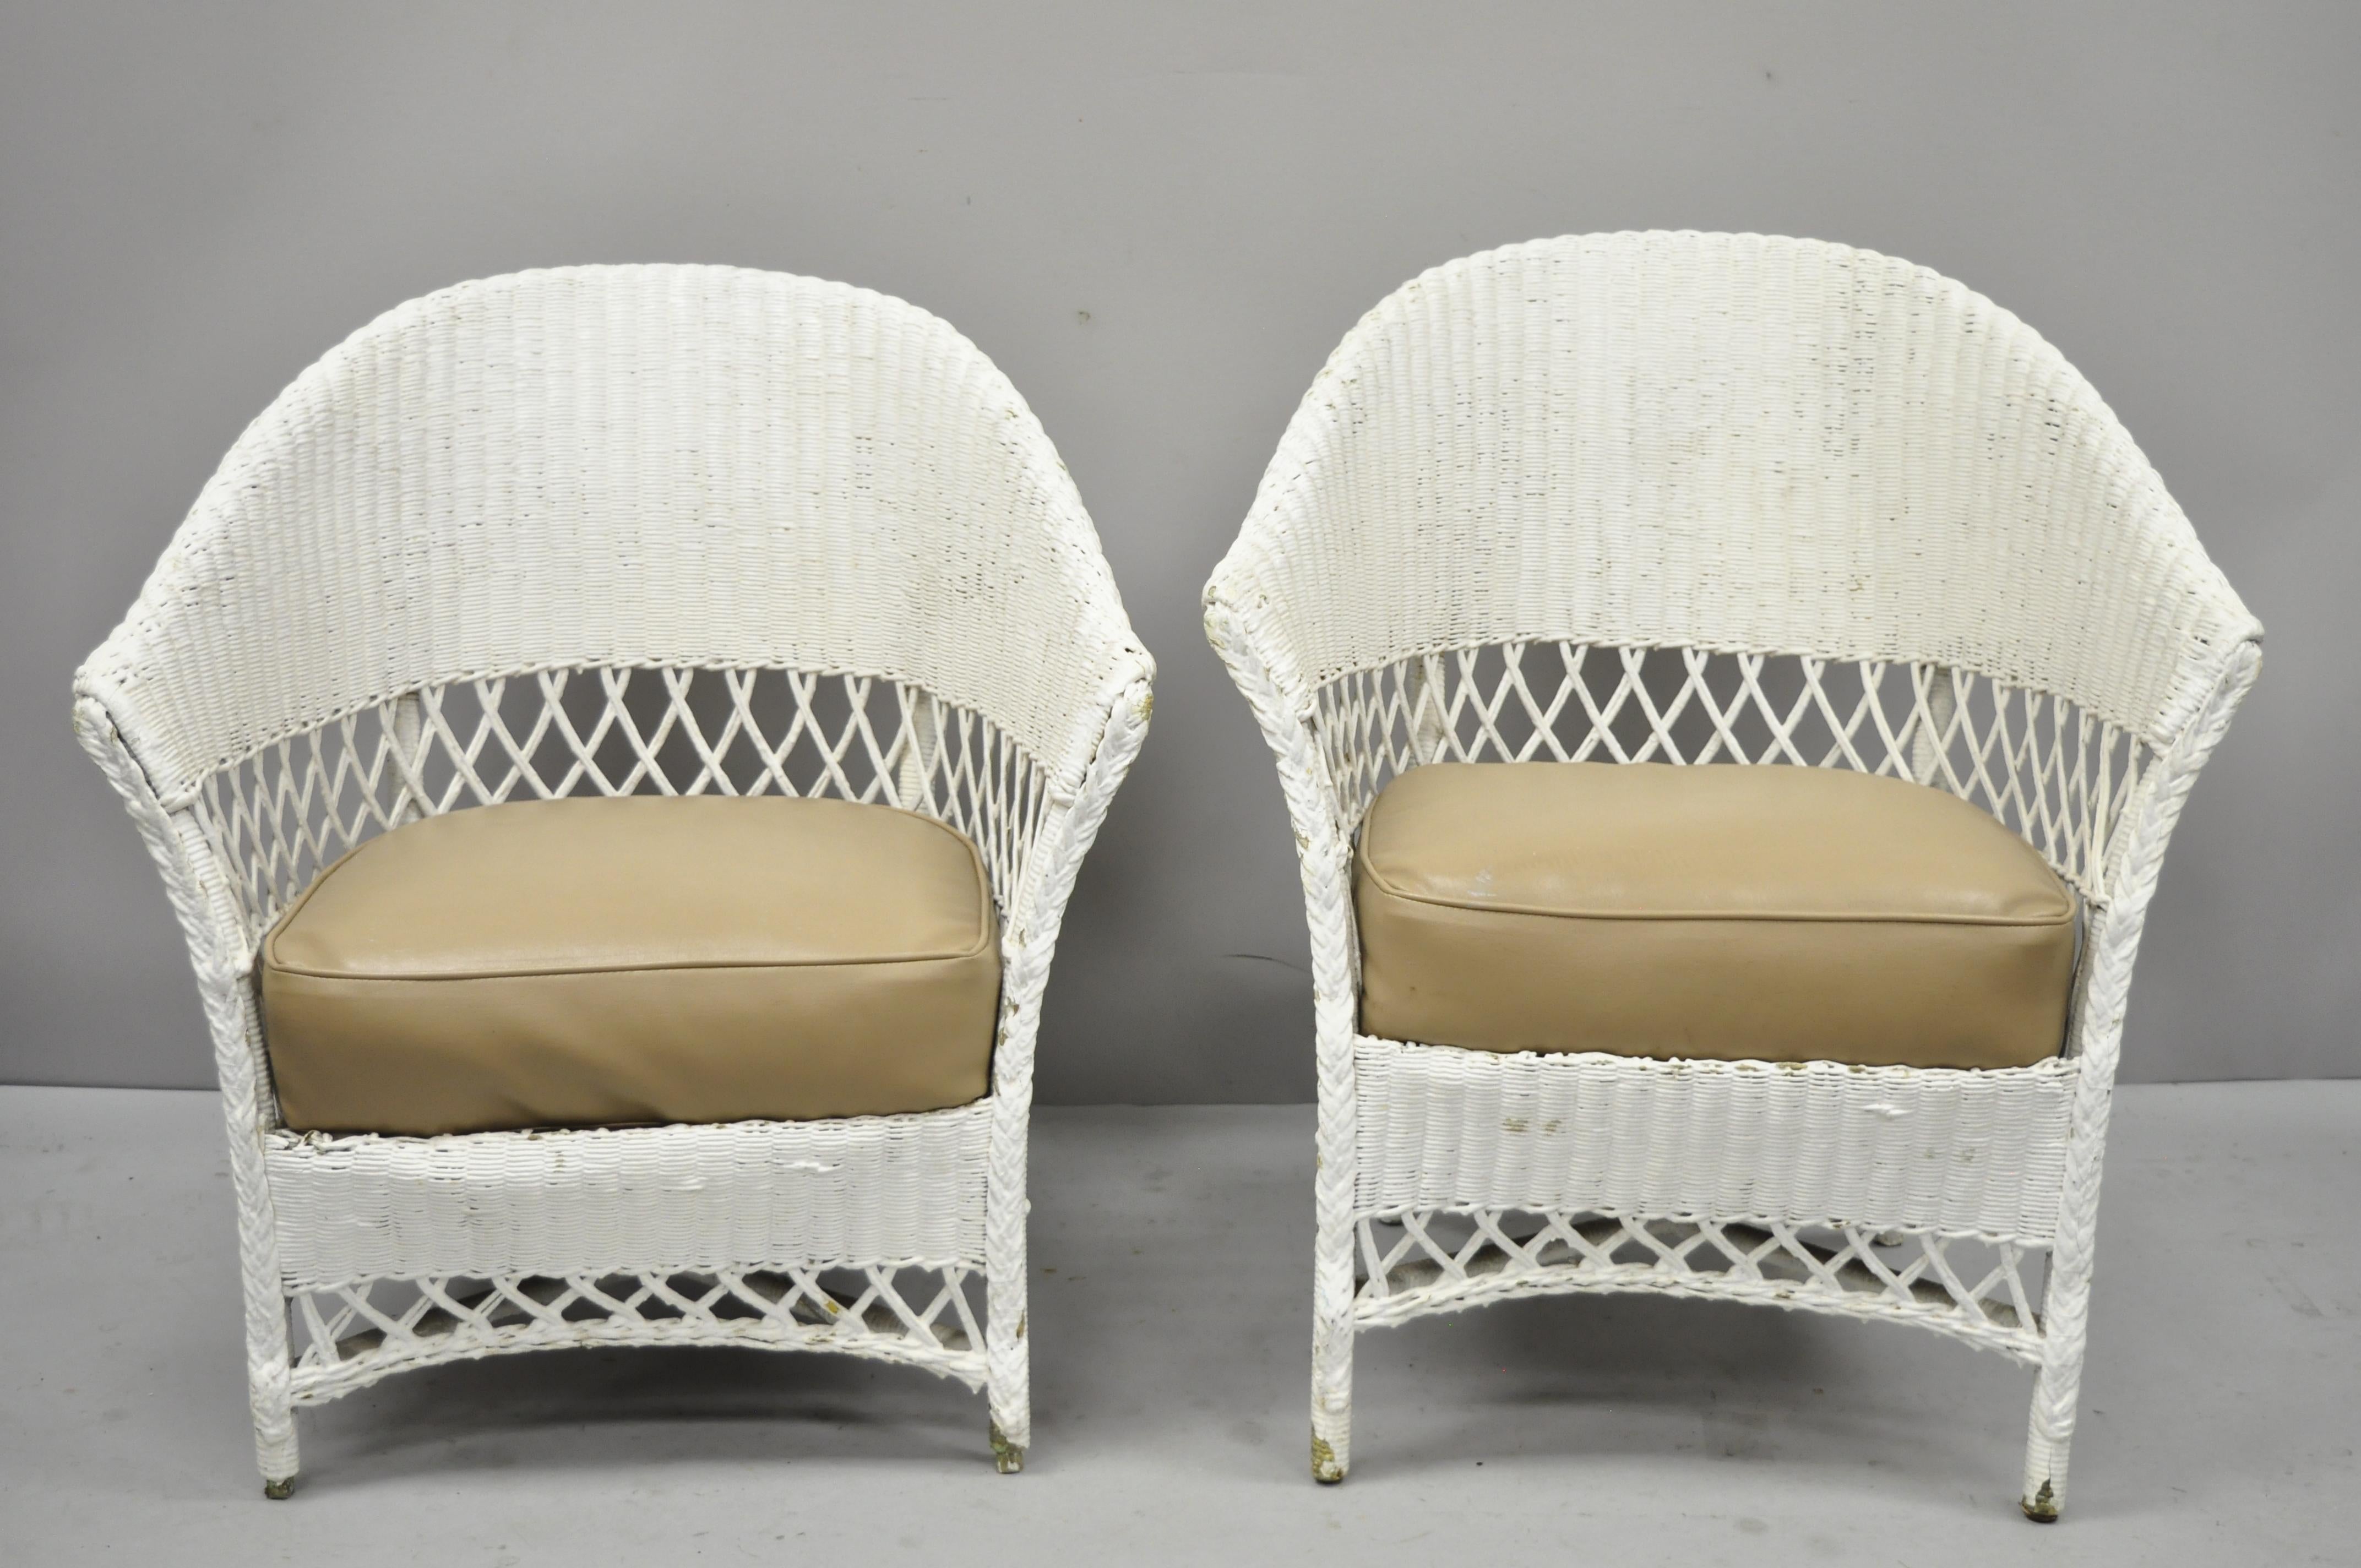 Antique pair of white wicker rattan his and hers sunroom Victorian armchairs. Listing features His and hers armchairs (slight variance in size), wicker frames, vinyl seats, very nice vintage item, quality American craftsmanship, circa early 20th